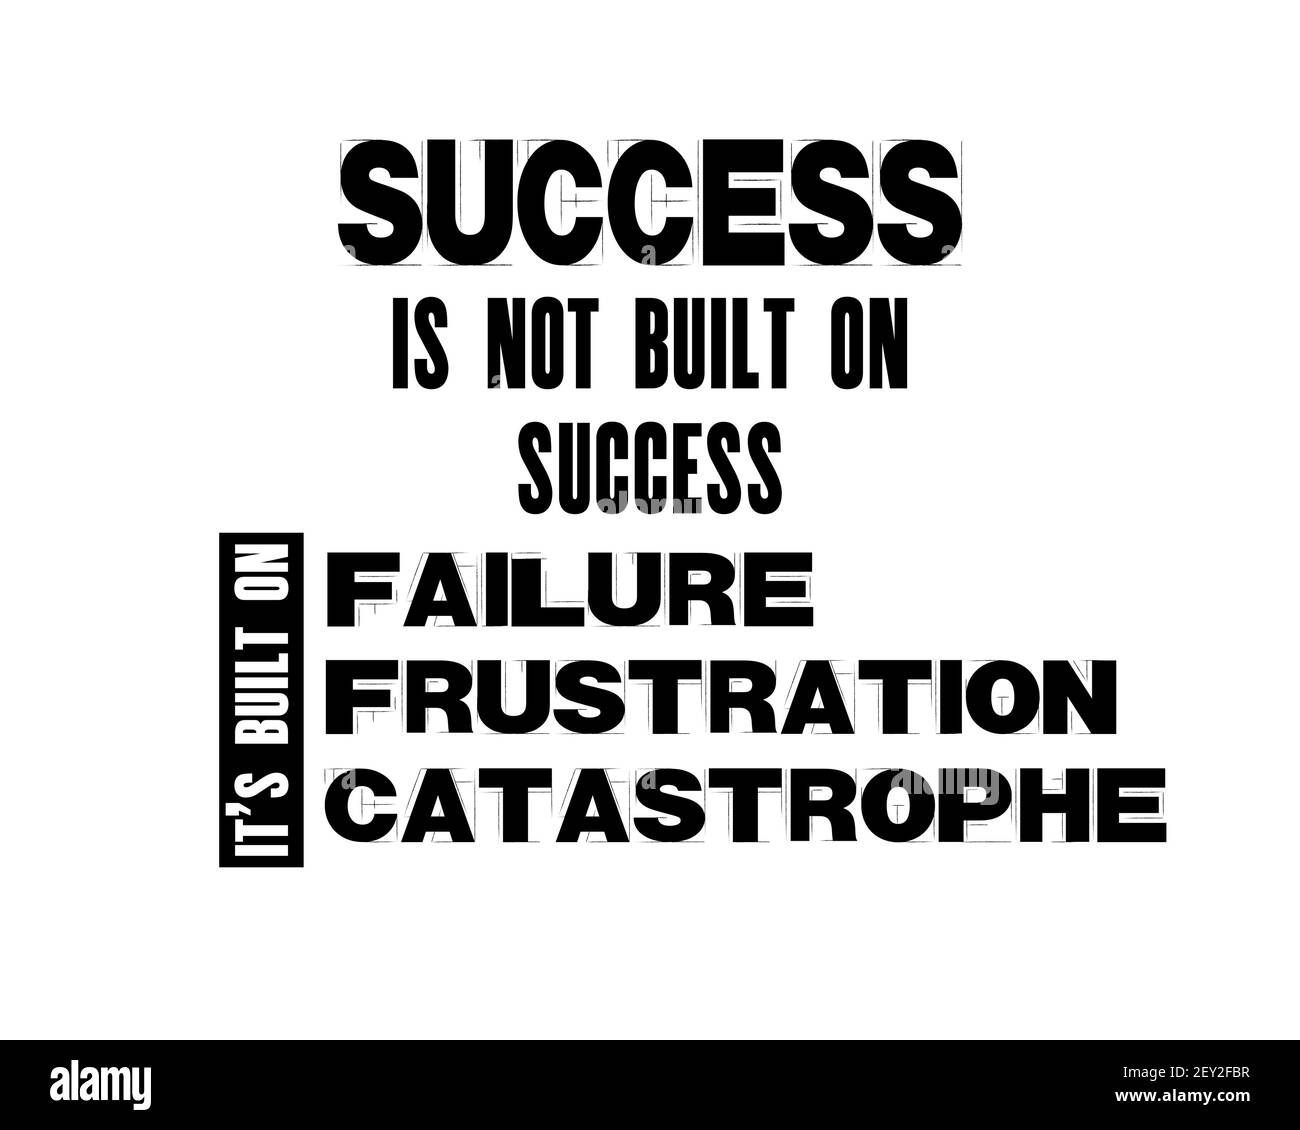 Inspiring motivation quote with text Success Is Not Built On Success It Is Built On Failure, Frustration, Catastrophe. Vector typography poster and t- Stock Vector